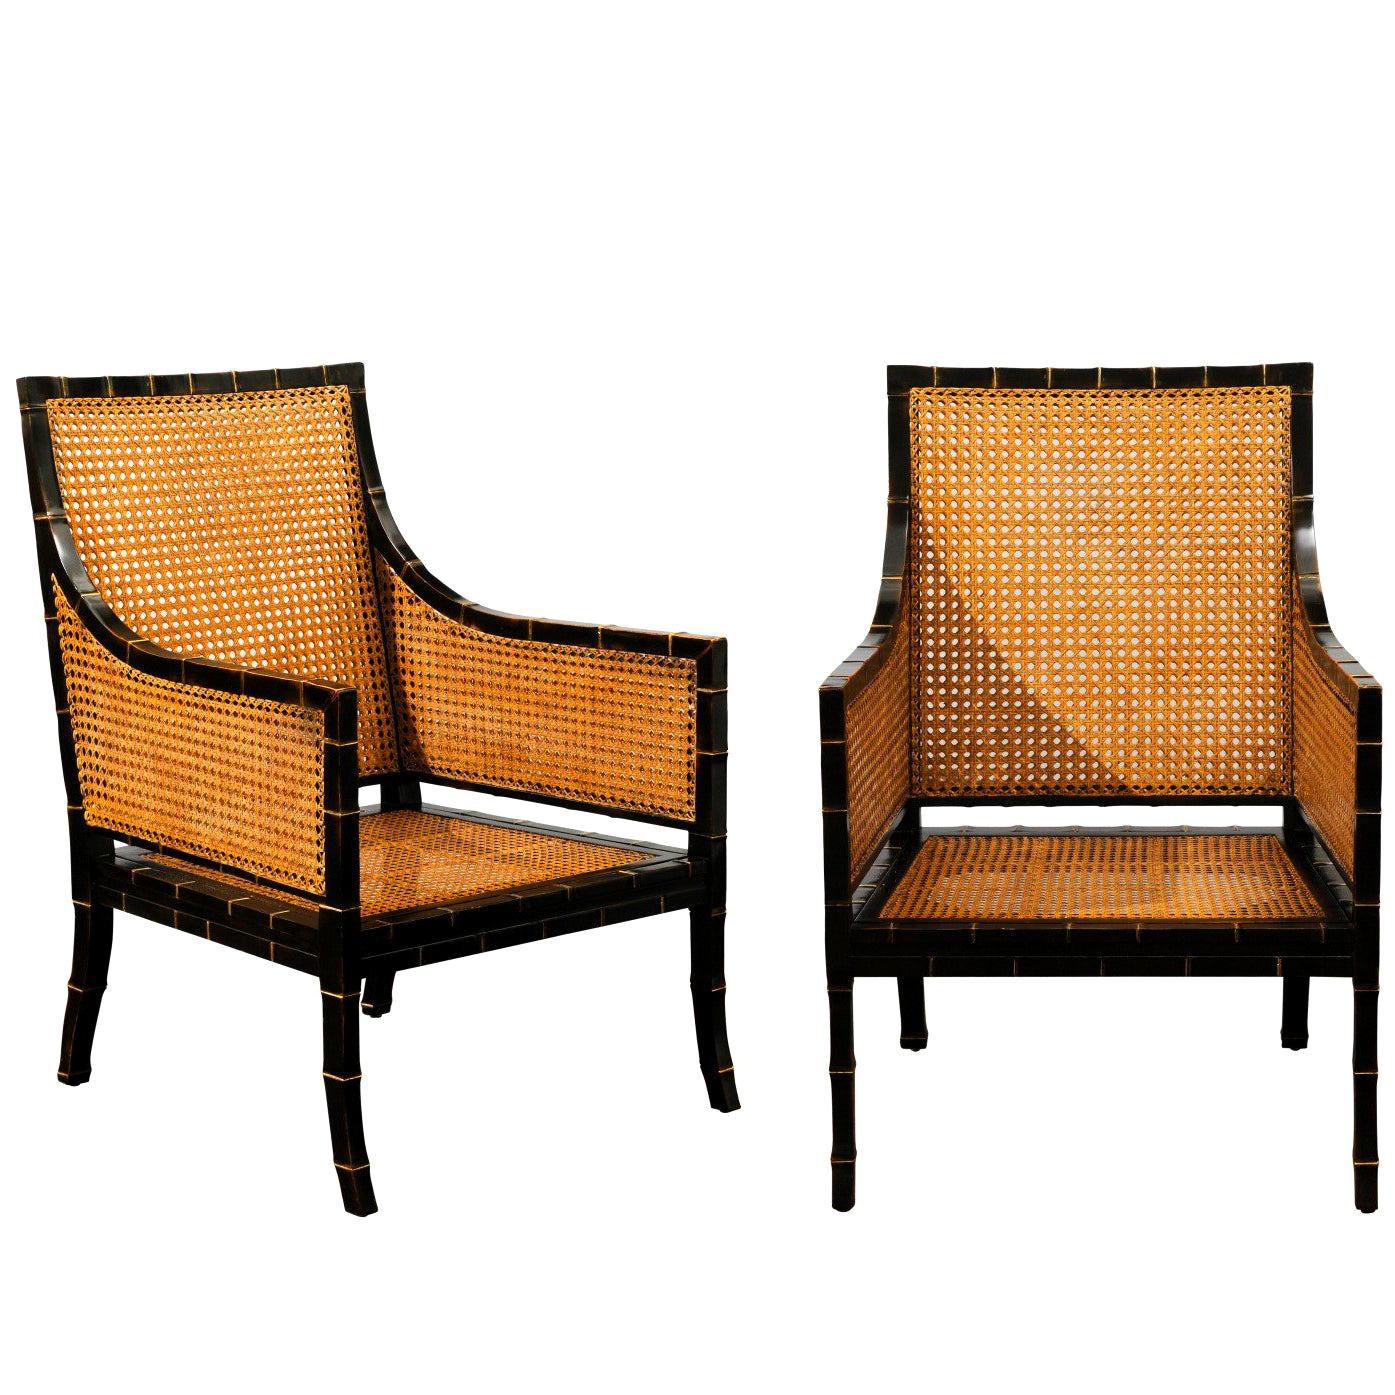 Beautiful Pair of Large Scale Double-Sided Cane Club Chairs - 2 Pair Available For Sale